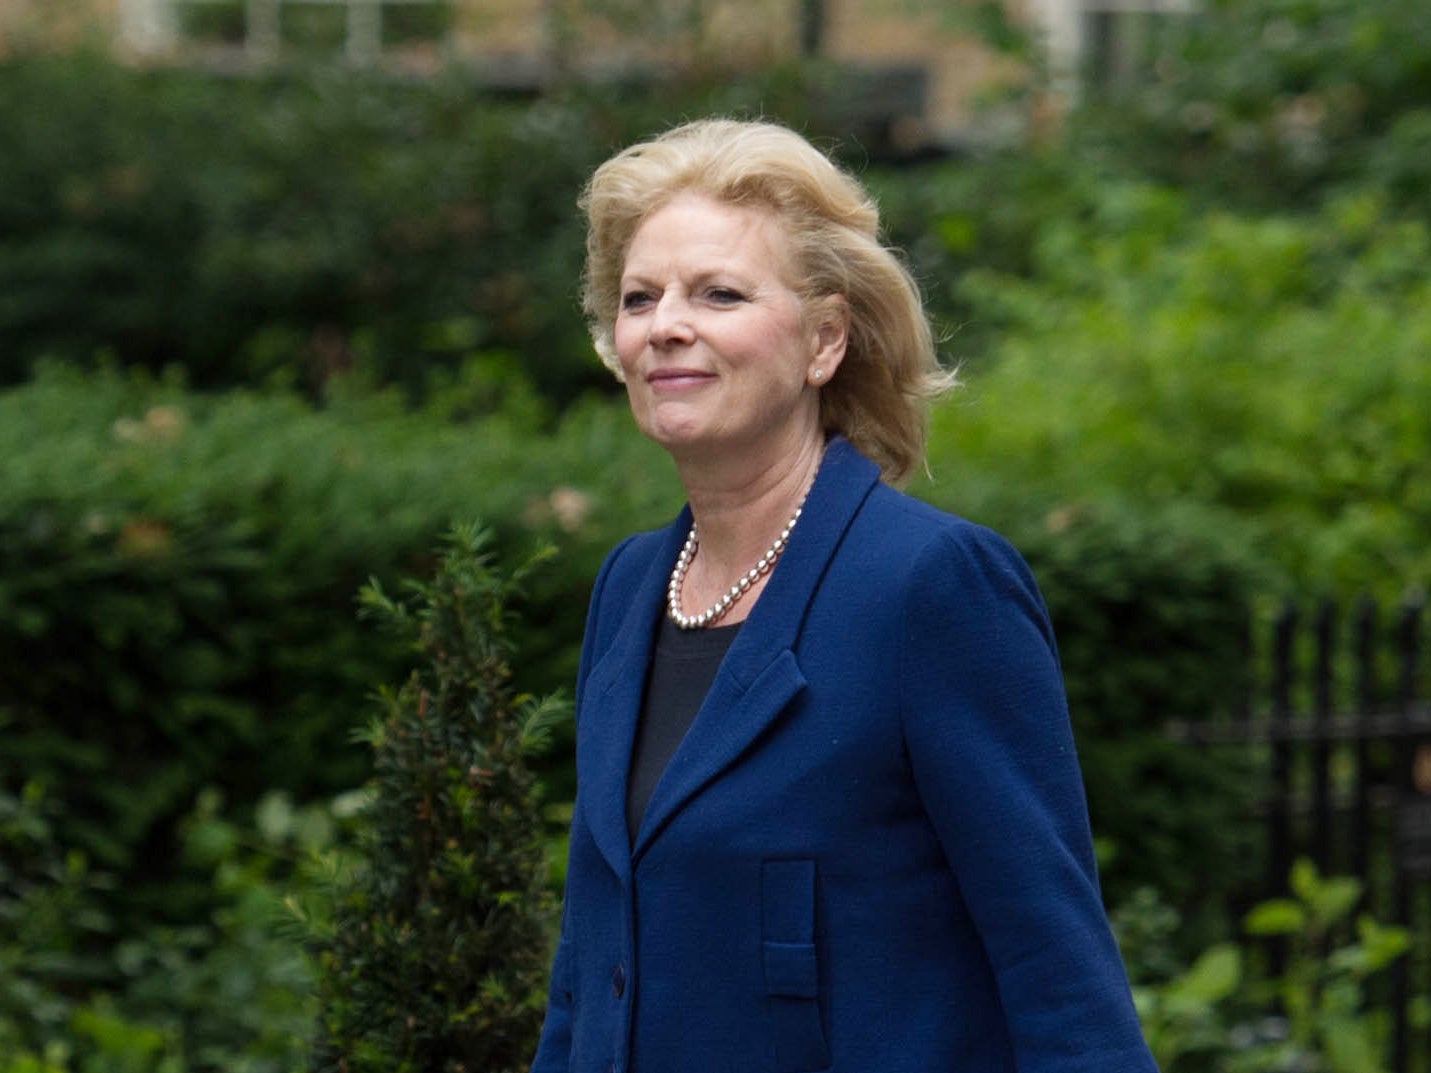 Anna Soubry, the MP for Broxtowe in Nottinghamshire, who was the apparent target of an online message which read: 'someone jo cox Anna sourby please'